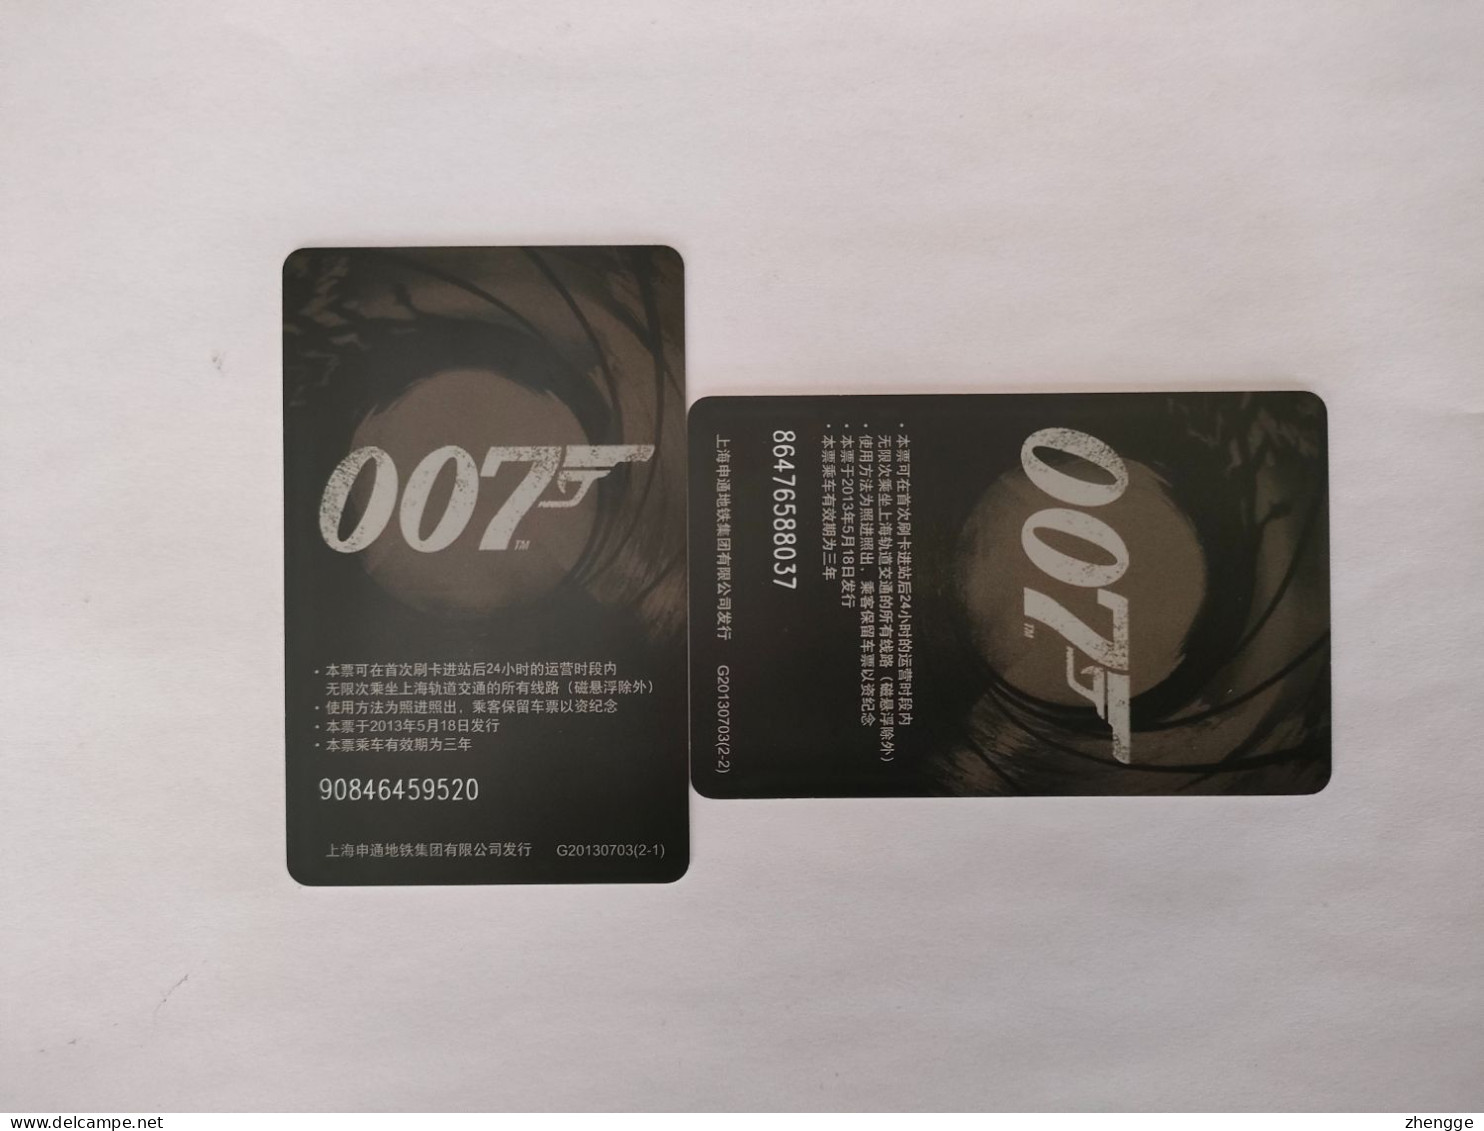 China Transport Cards, Movie,007, 50 Year Of Bond Style,metro Card, Shanghai City, 8000ex,(2pcs) - Sin Clasificación